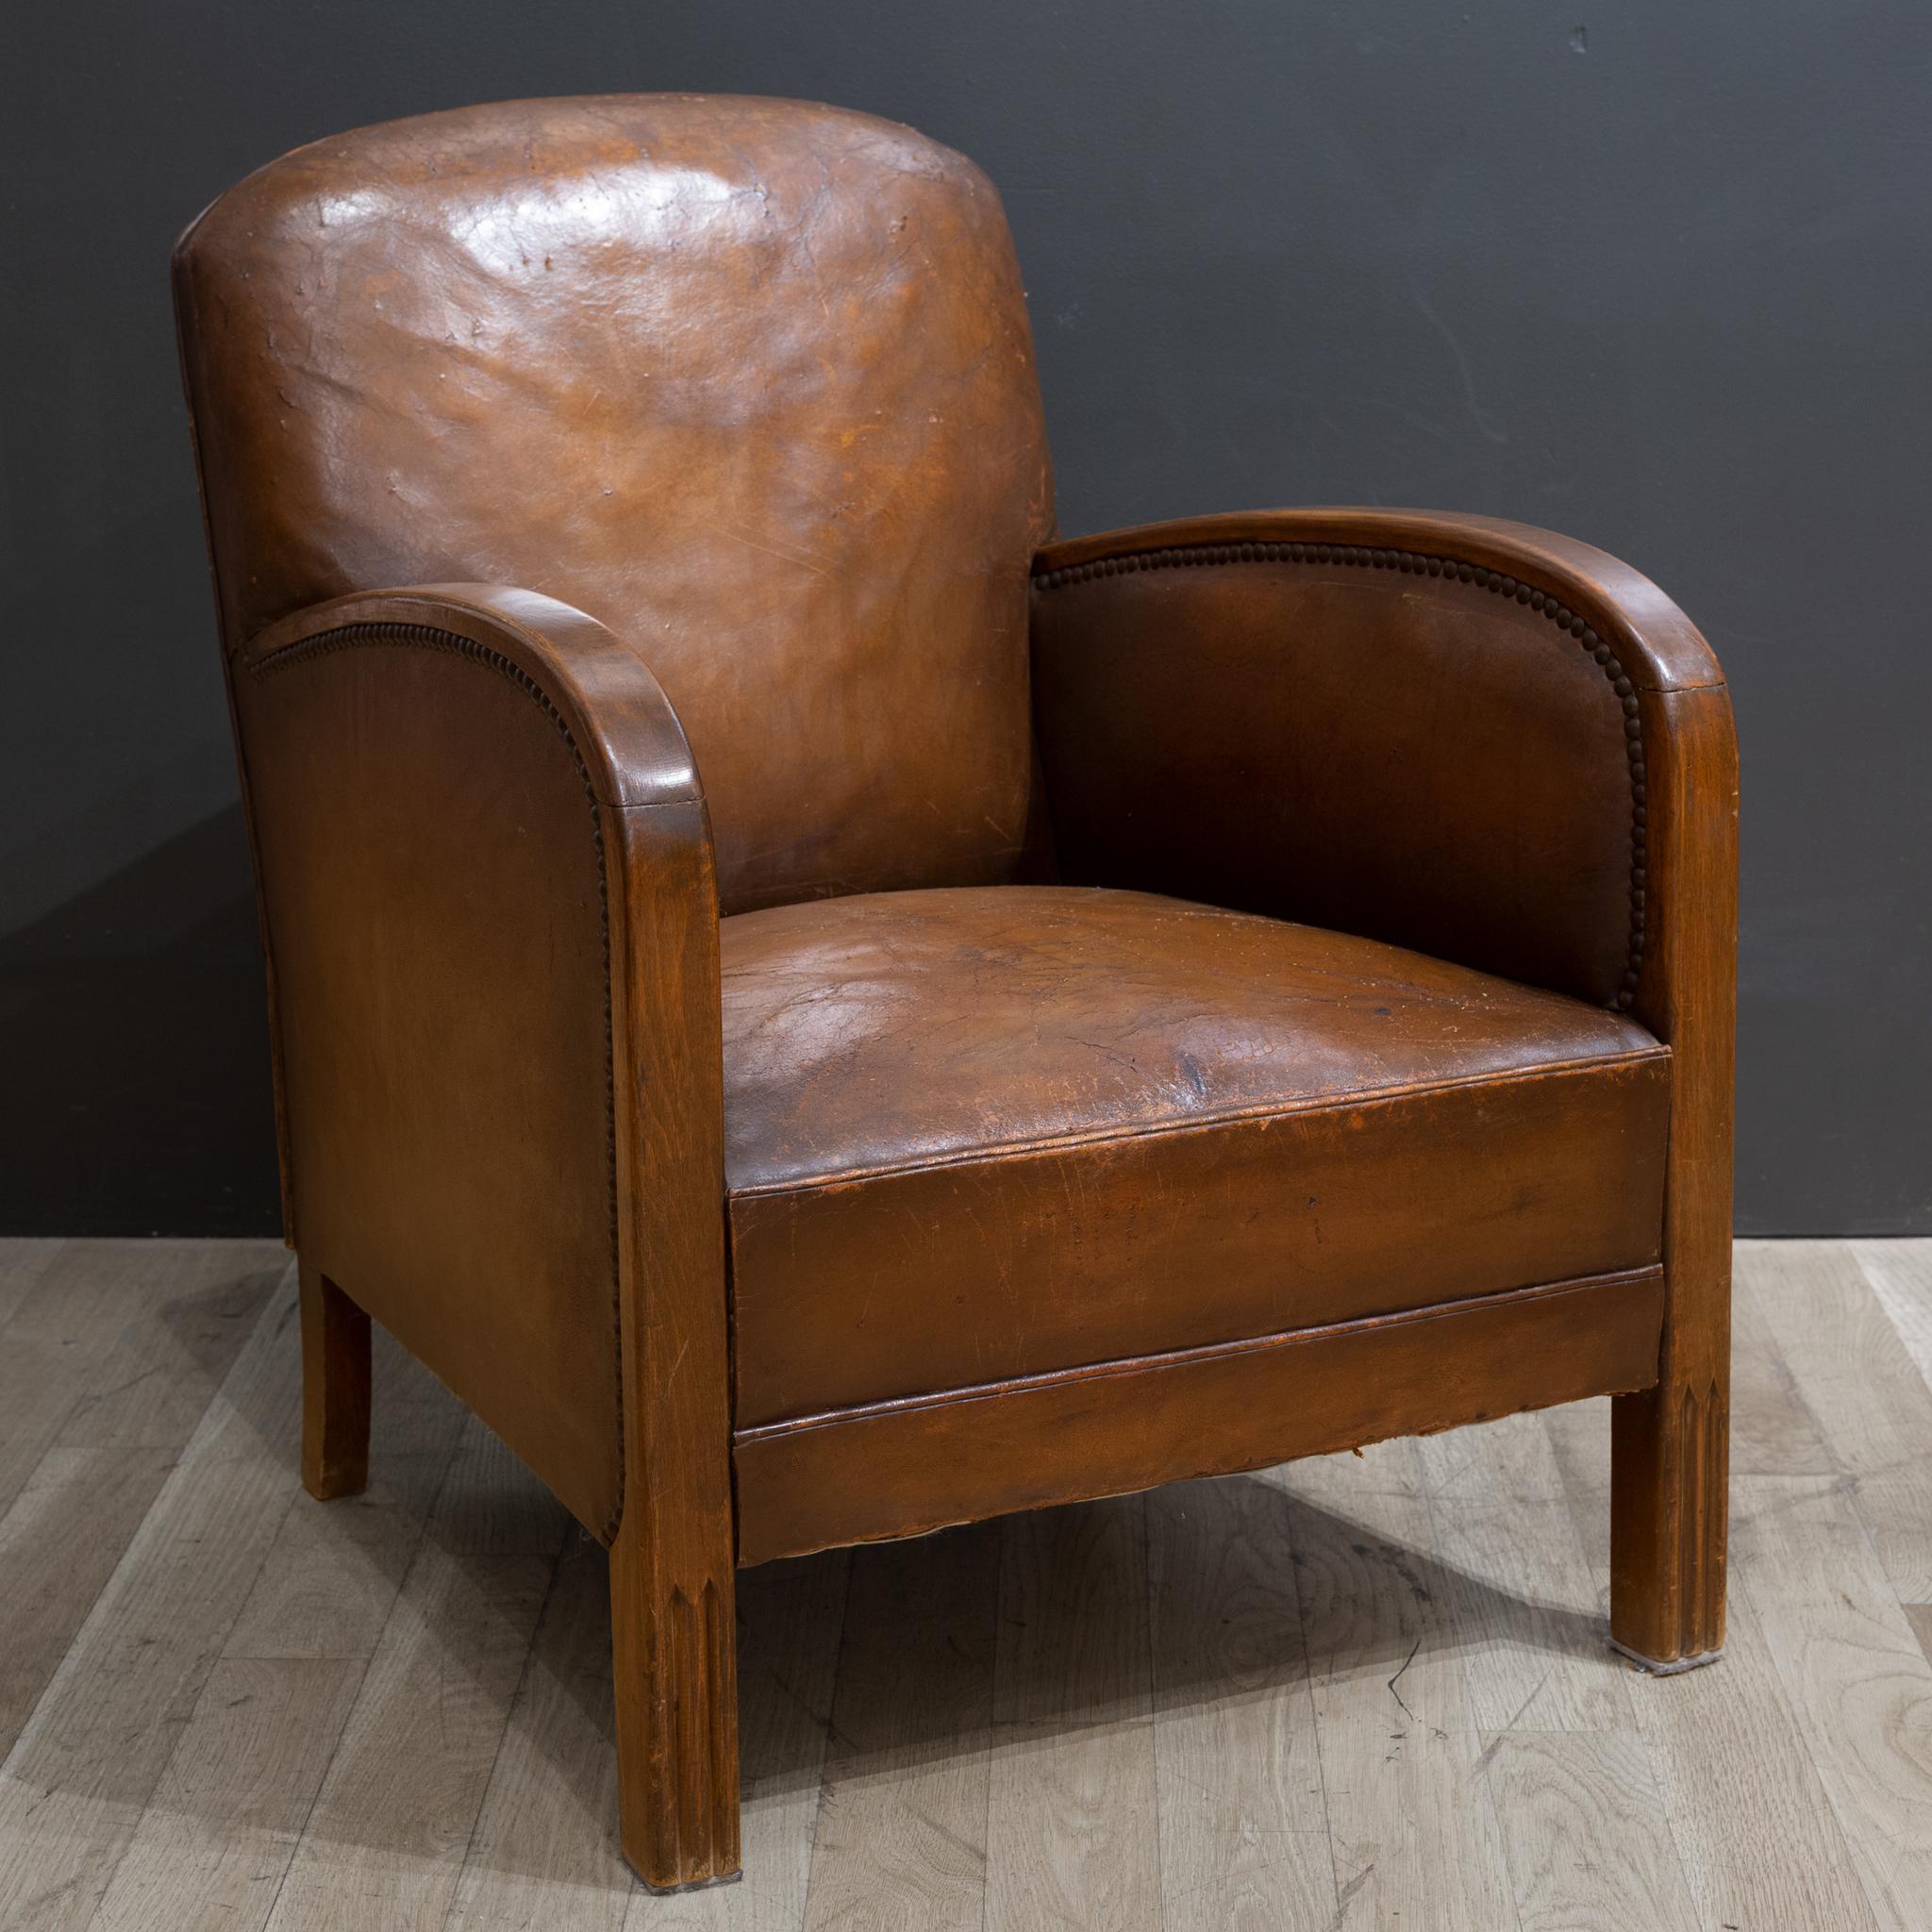 Art Deco Early 20th c. French Library Club Chair c.1930-1940